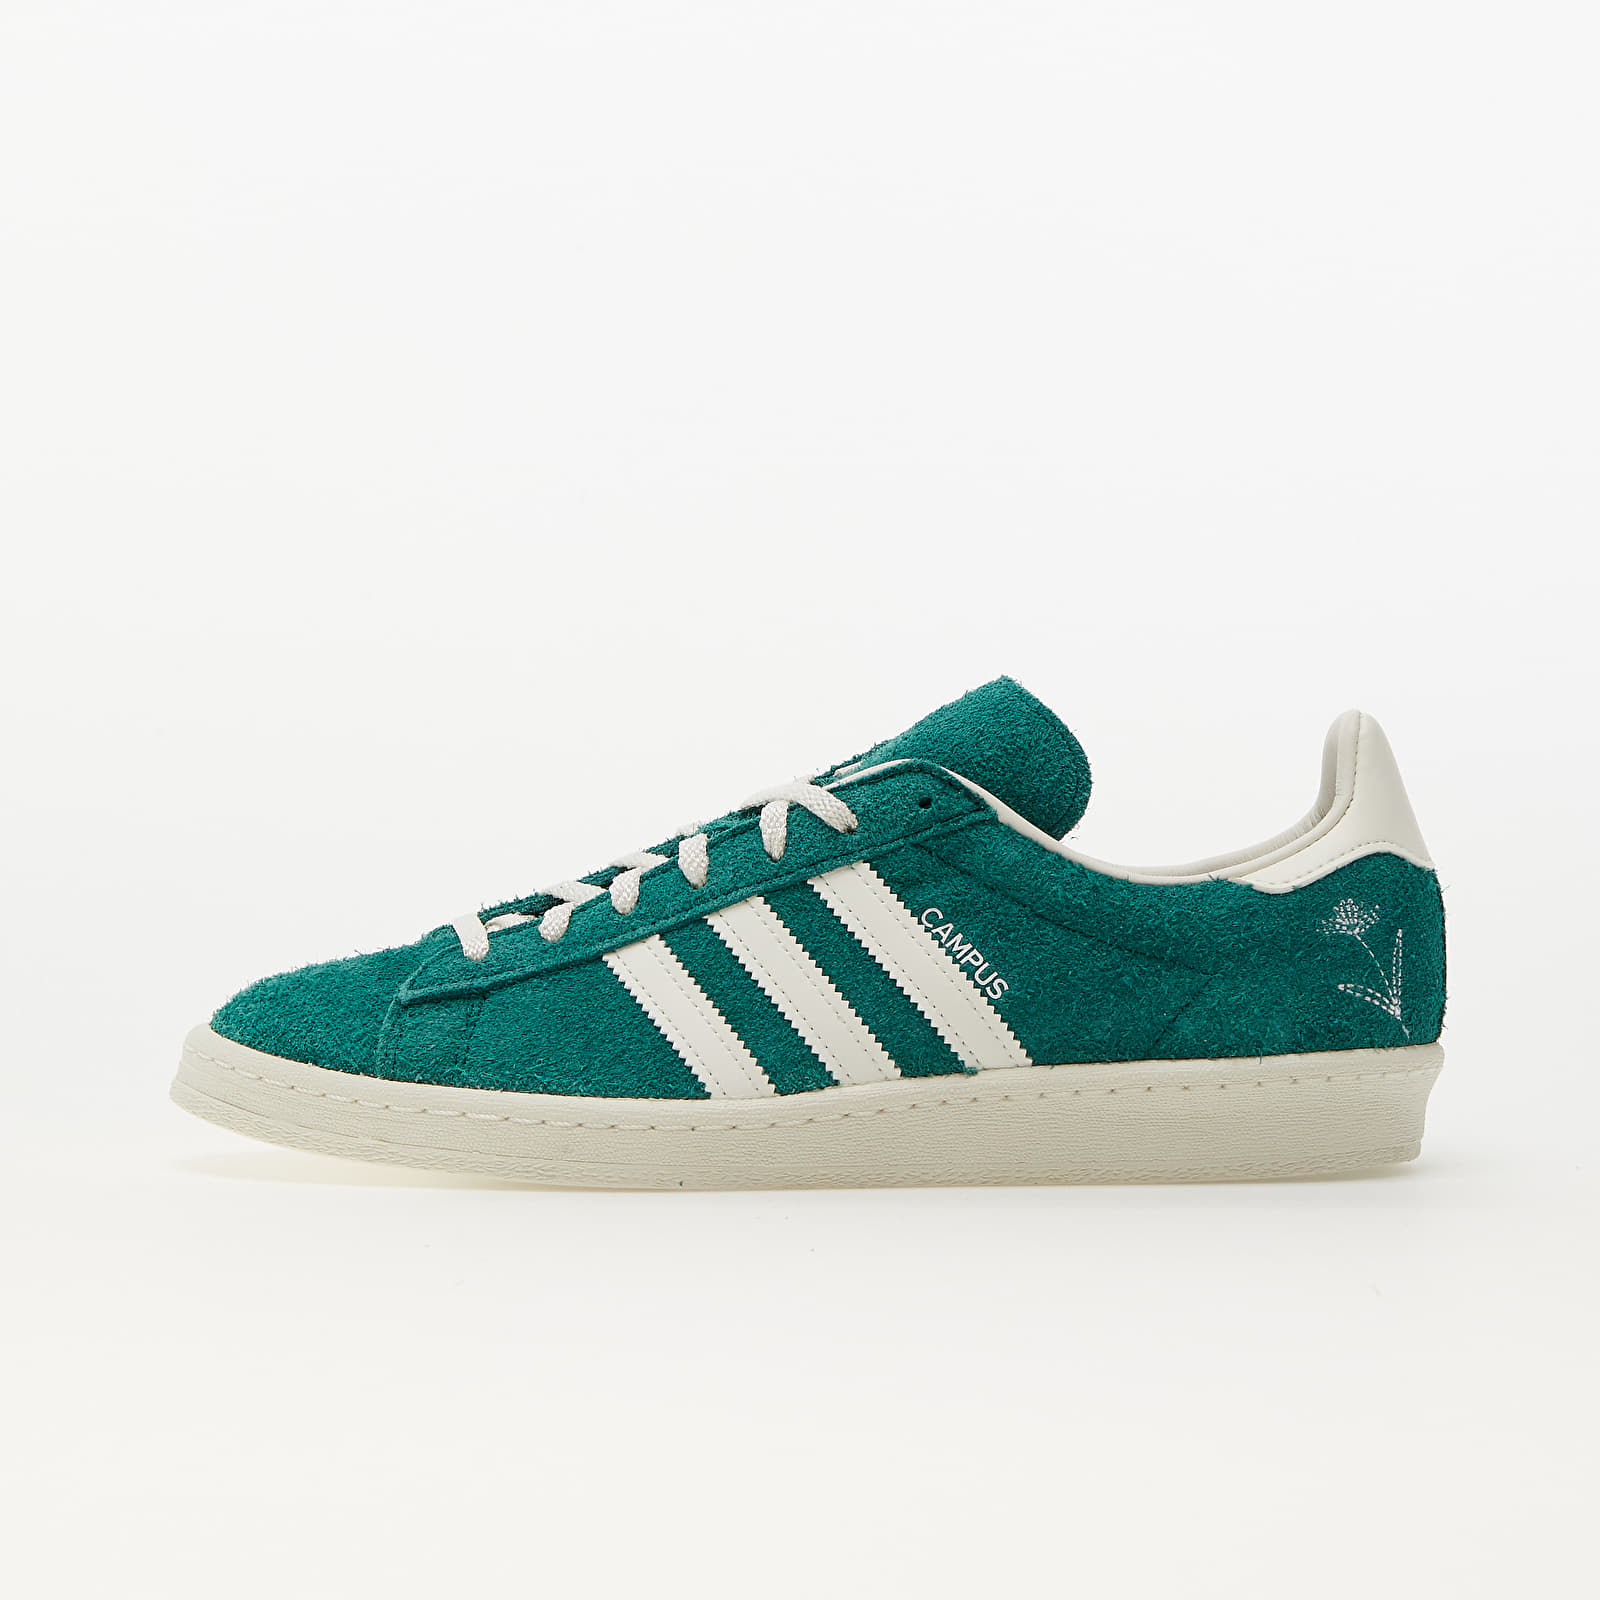 Chaussures et baskets homme adidas Campus 80s Core Green/ Off White/ Off White